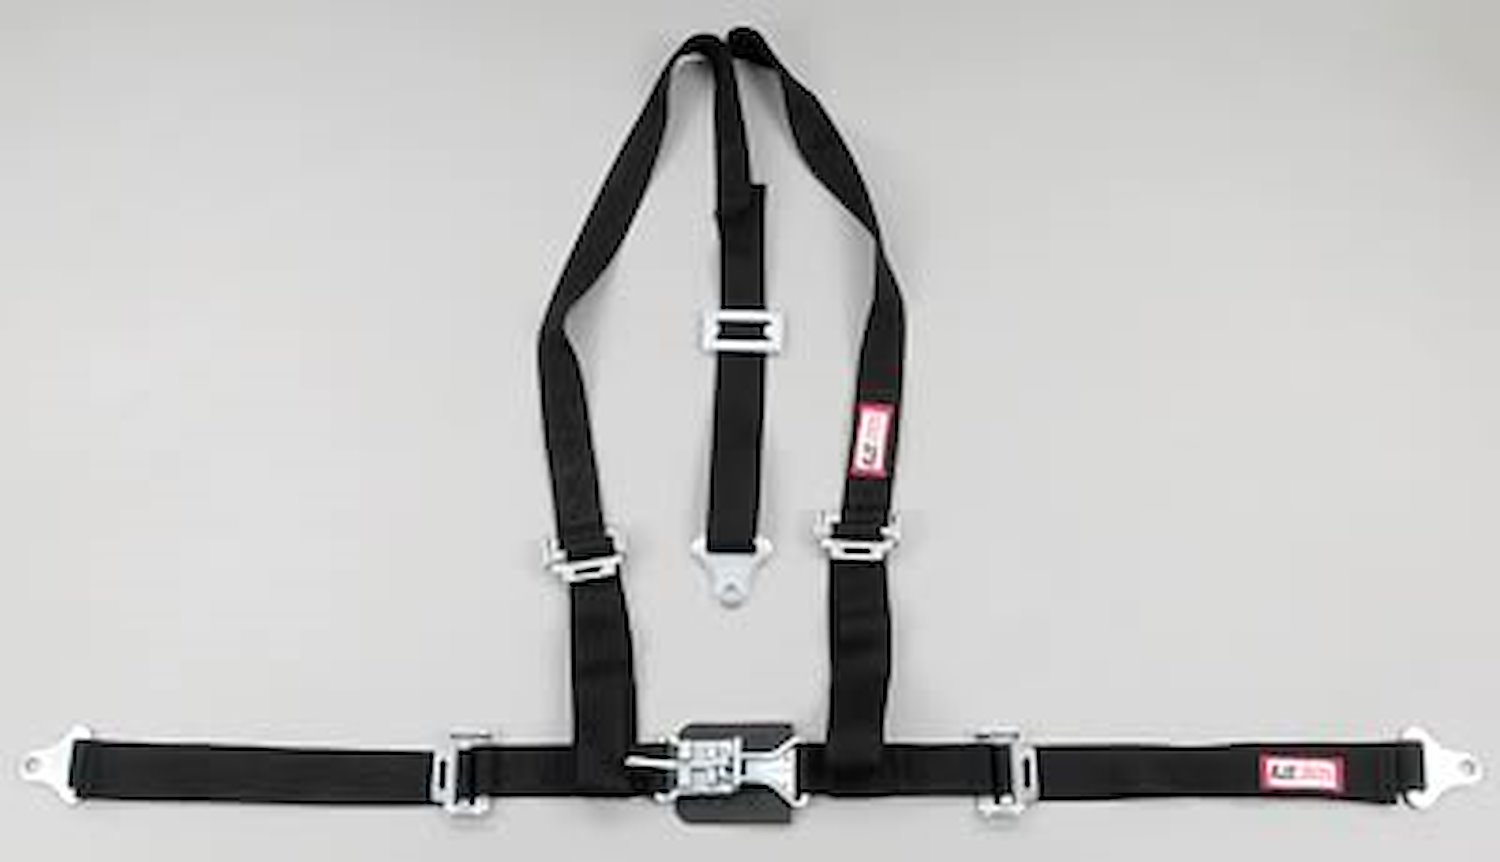 NON-SFI L&L HARNESS 2 PULL DOWN Lap Belt SNAP SEWN IN 2 S.H. Individual ROLL BAR Mount w/STERNUM STRAP WRAP/BOLT GRAY